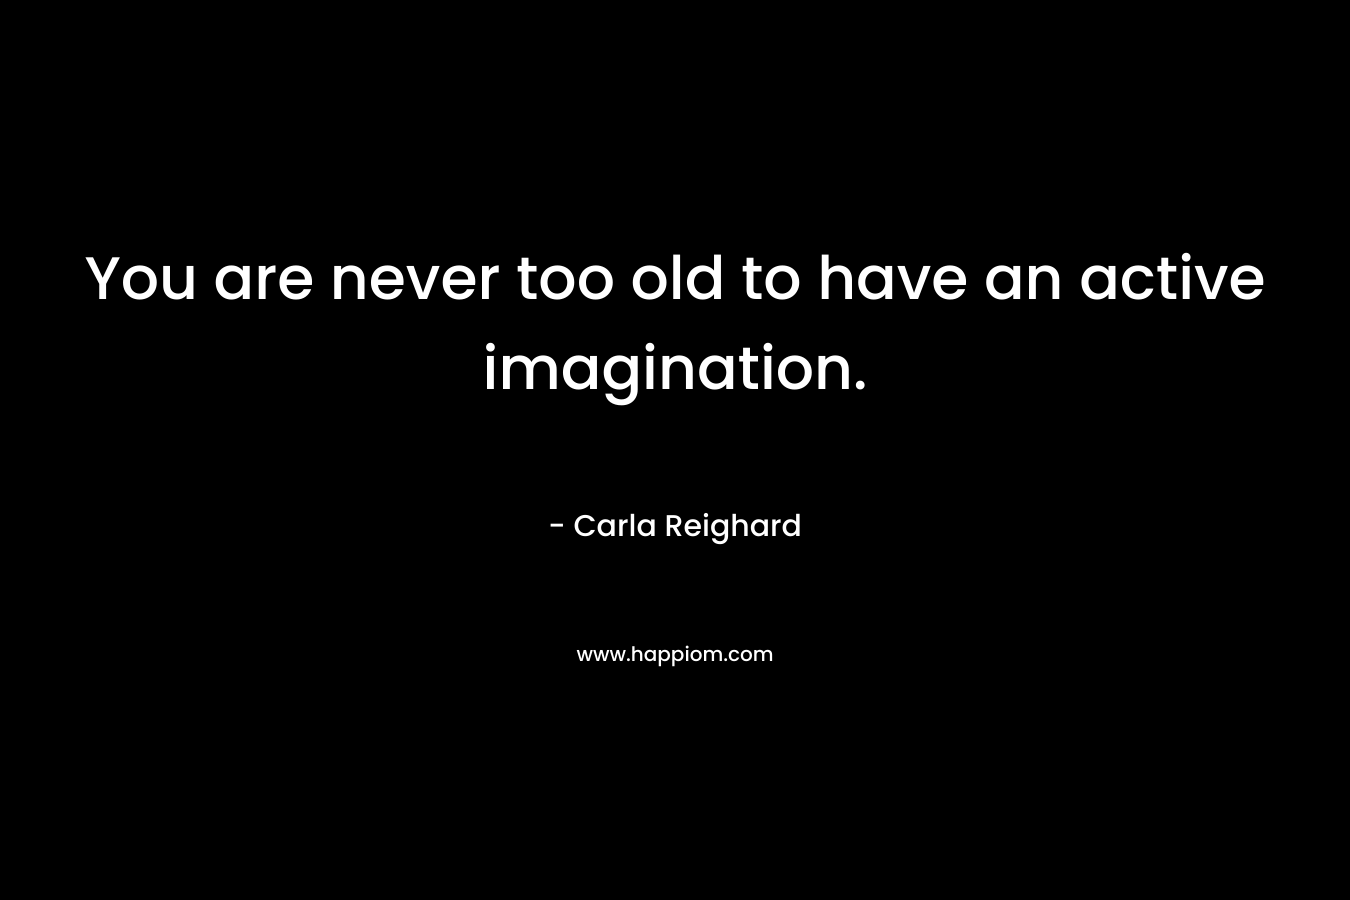 You are never too old to have an active imagination. – Carla Reighard